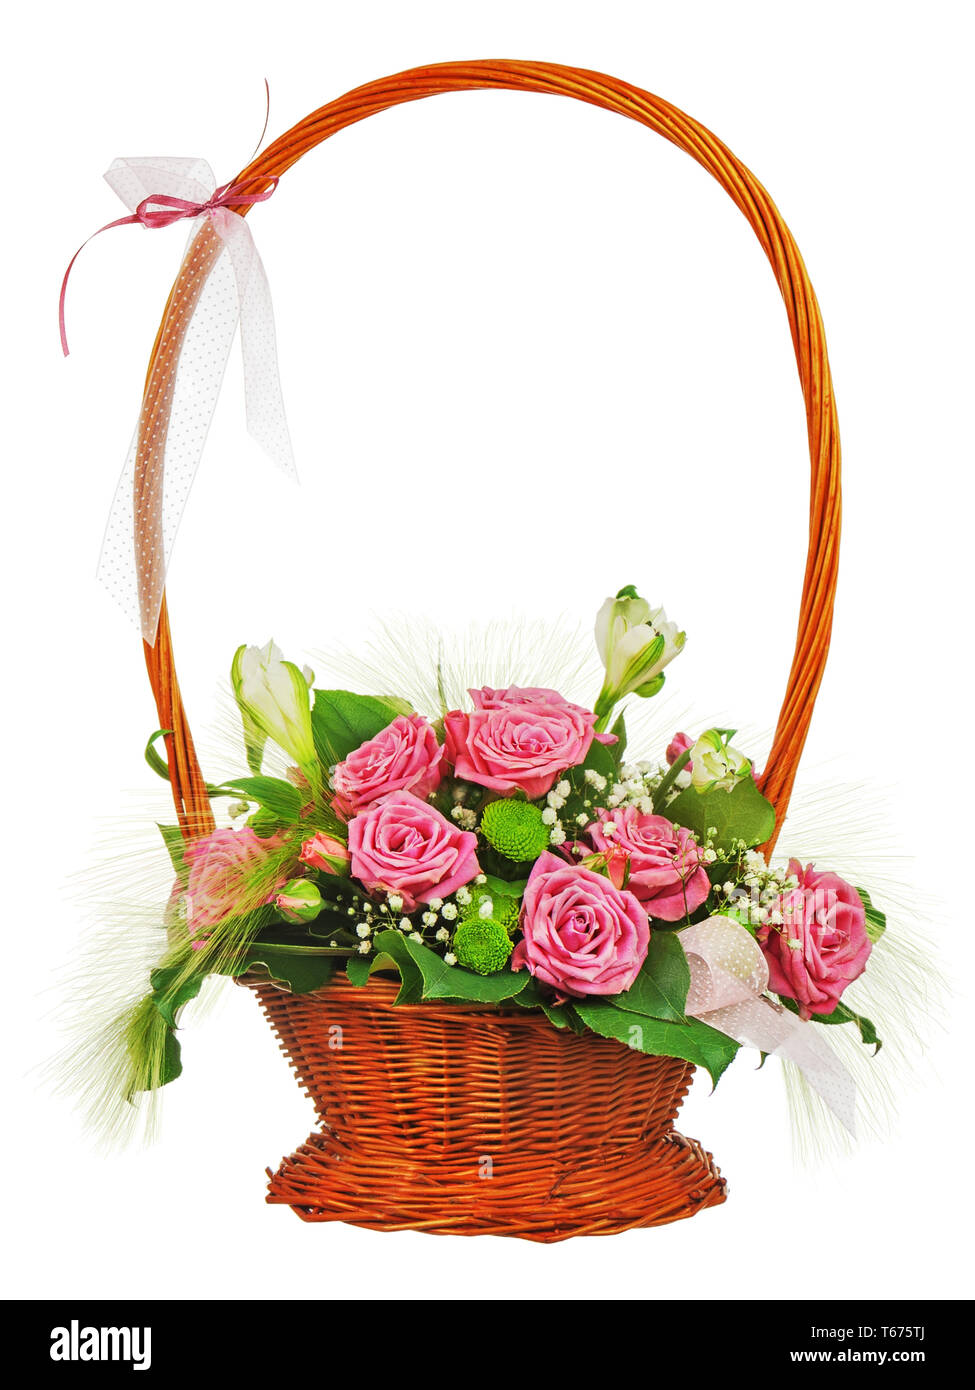 Colorful flower bouquet from roses in wicker baske Stock Photo